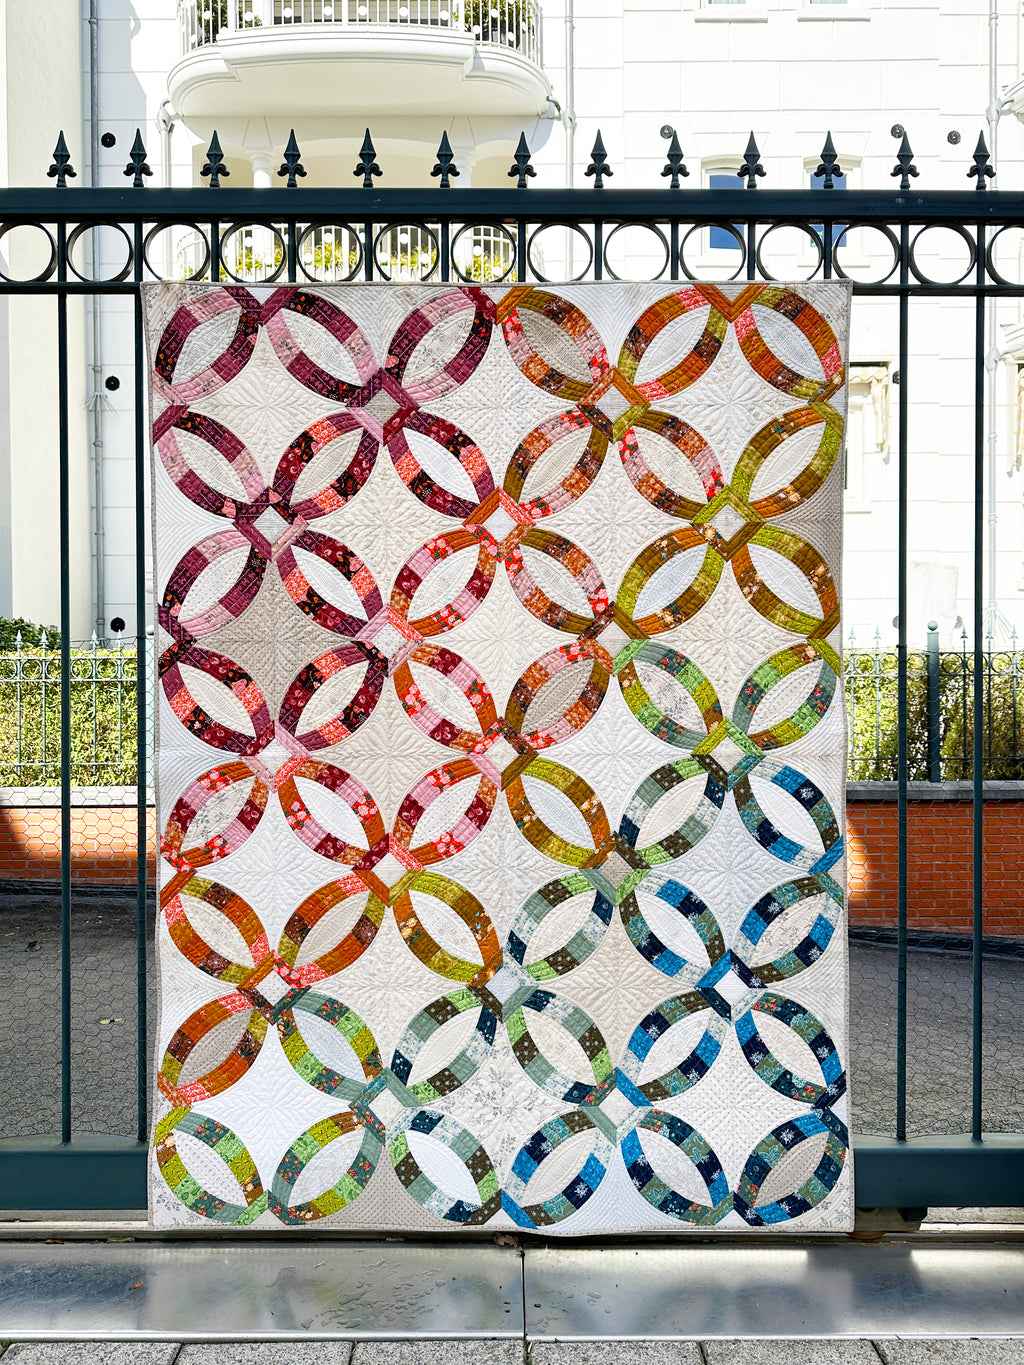 Double Rings Pattern by Sew Kind of Wonderful